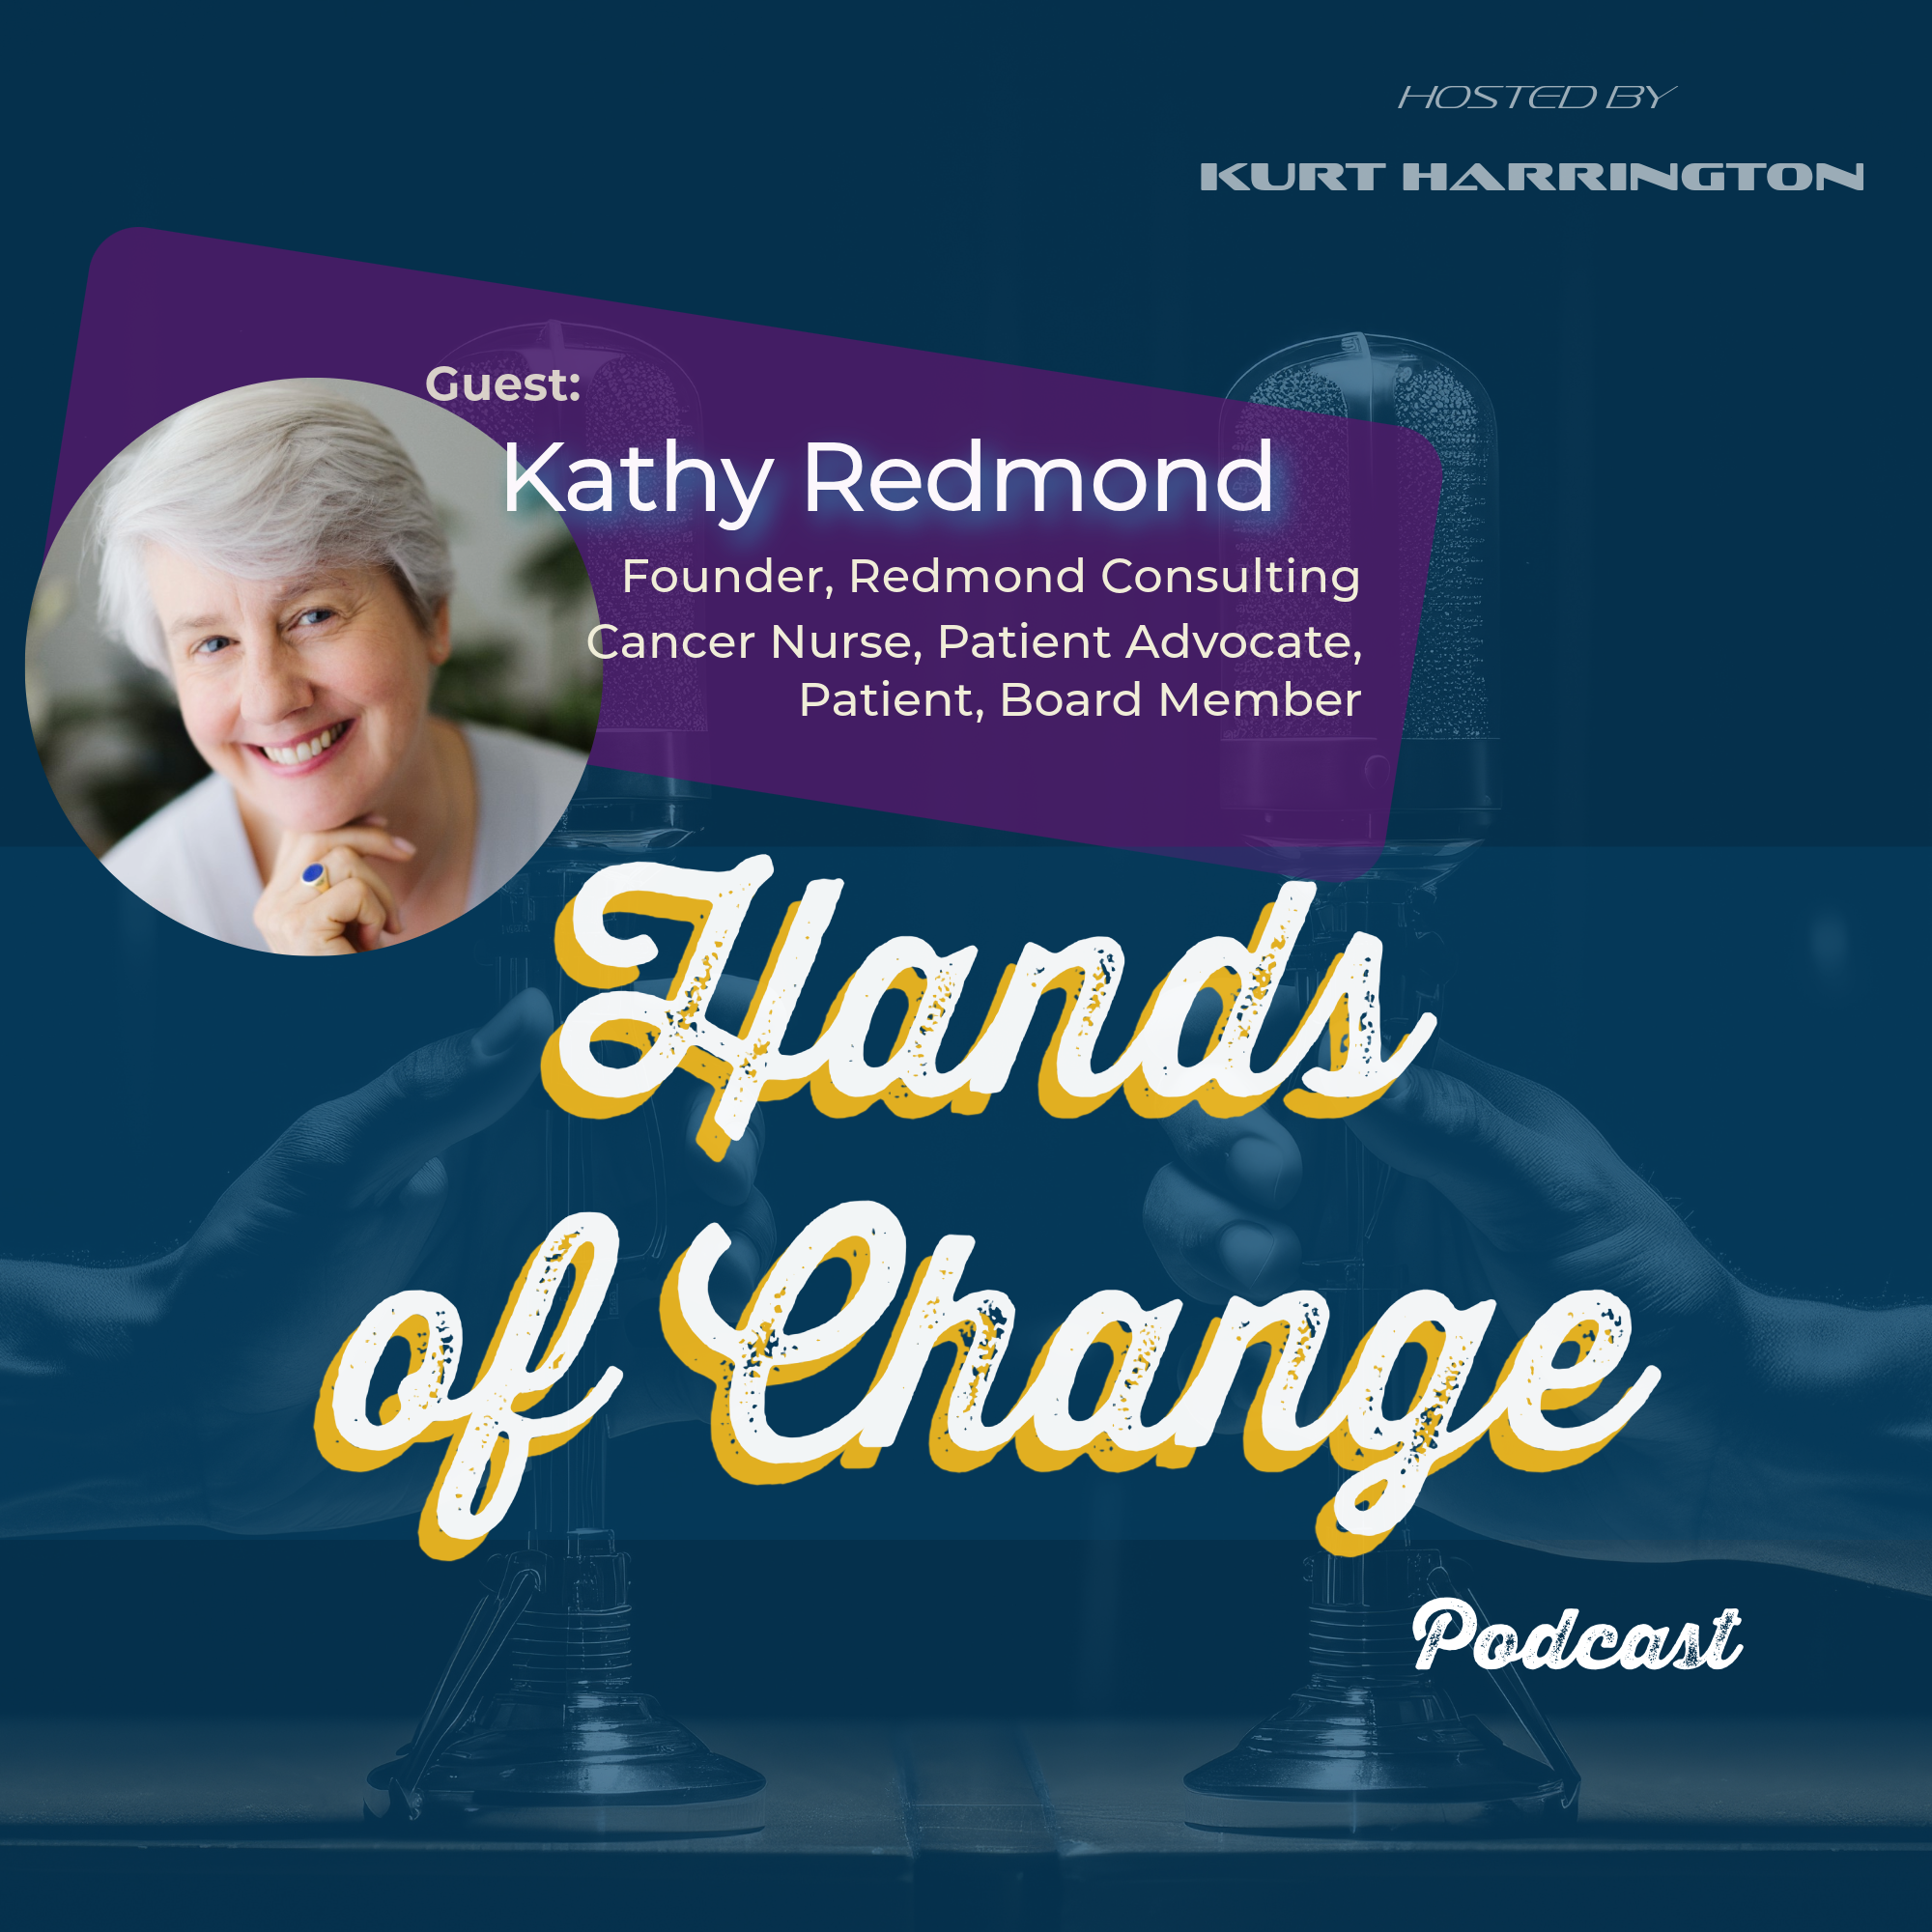 Image of Kathy Redmond and "Hands of Podcast" show artwork